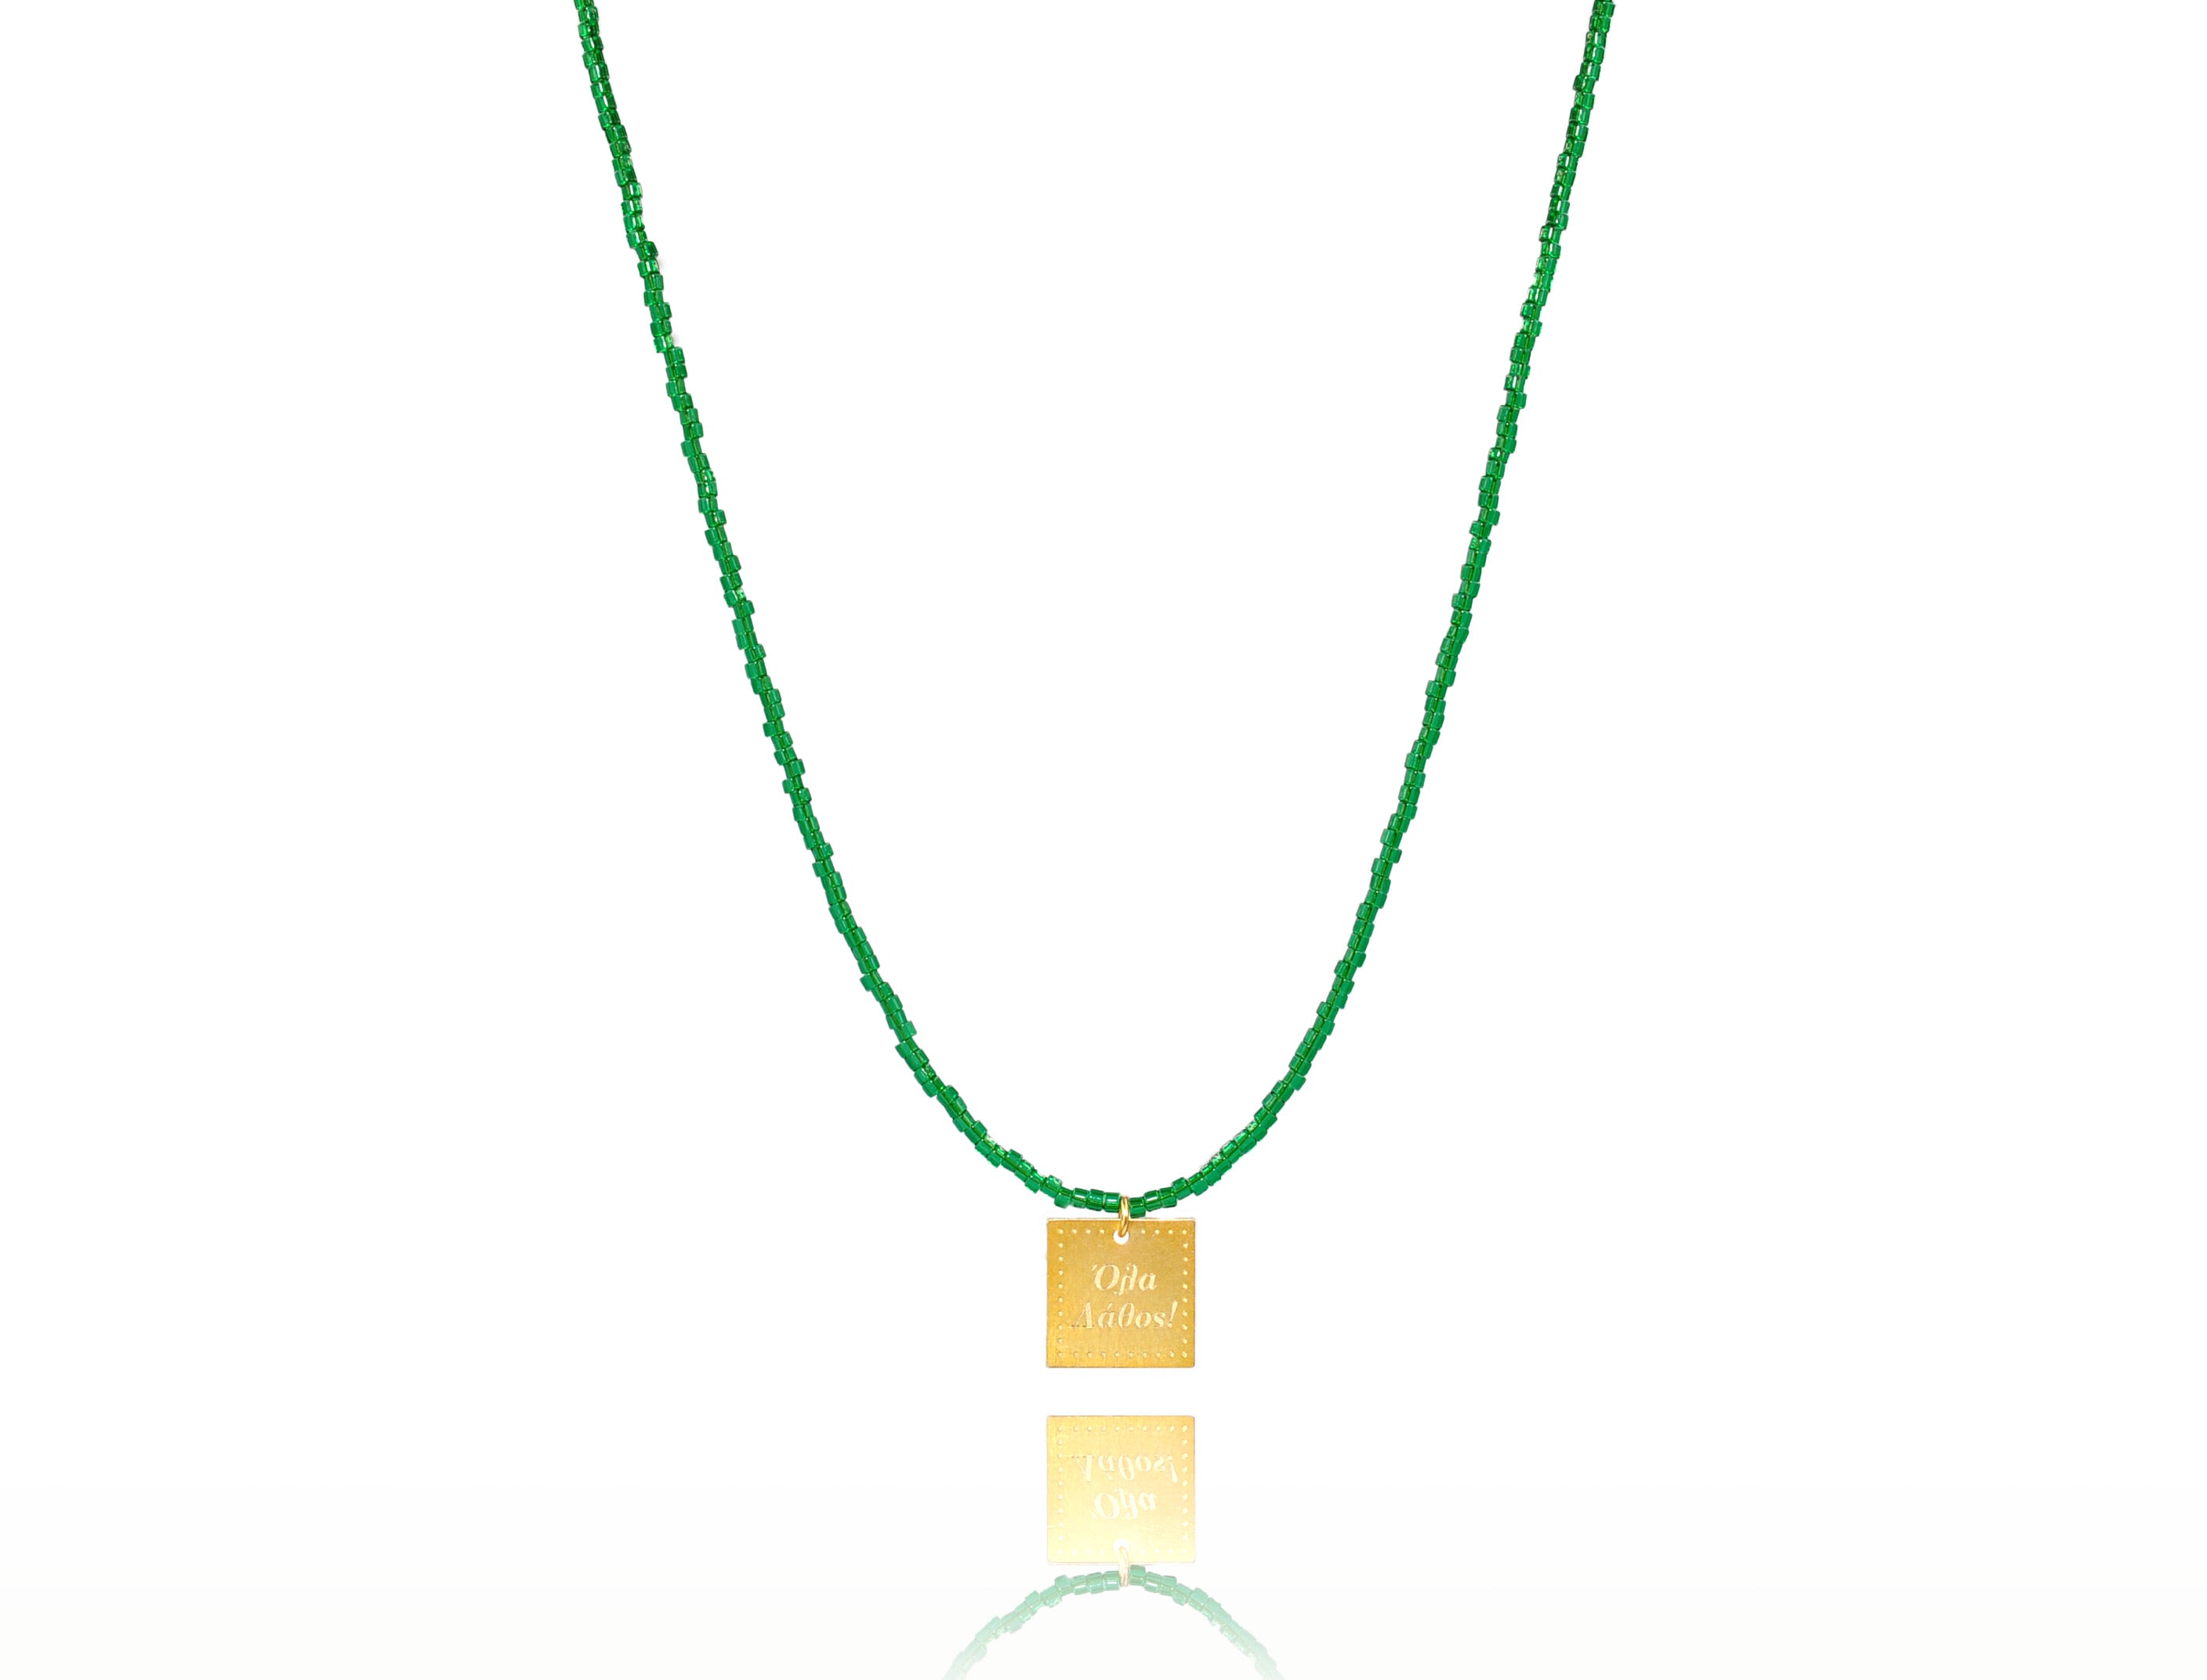 A necklace made of forest green japanese miyuki beads and a squared silver 925 charm plated in gold 24K, with a message ´´όλα λάθος'' -'It's all wrong! .